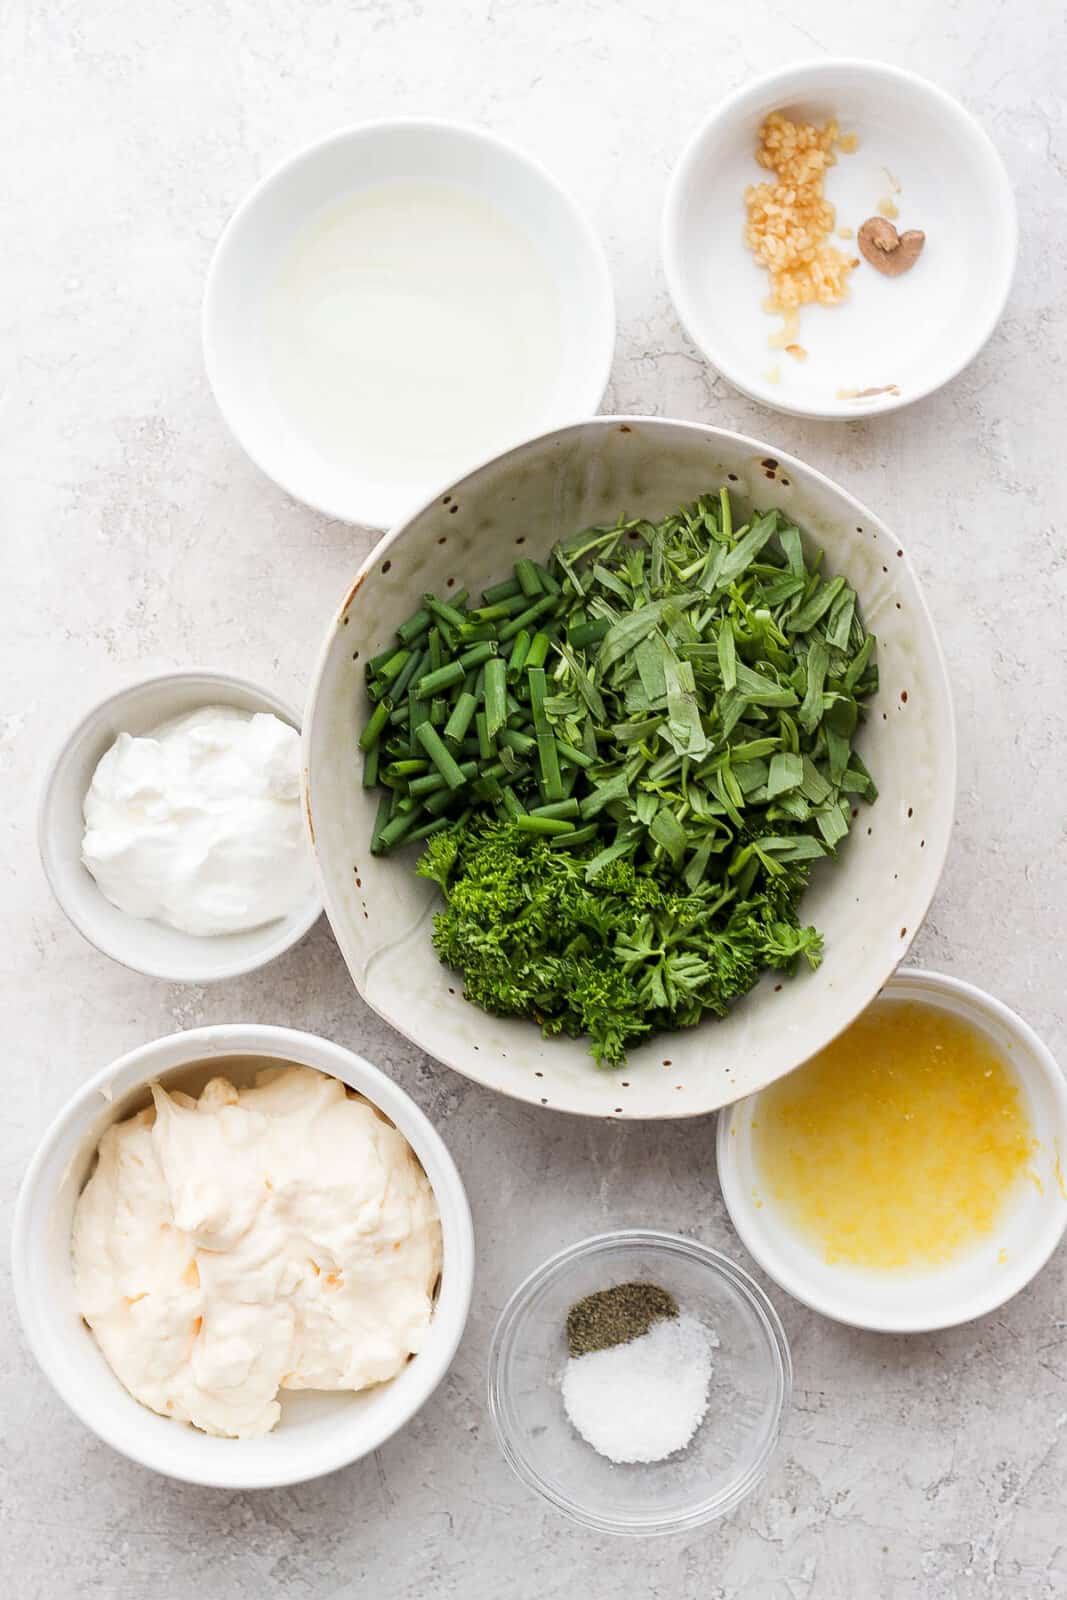 Ingredients for green goddess salad dressing in separate bowls.